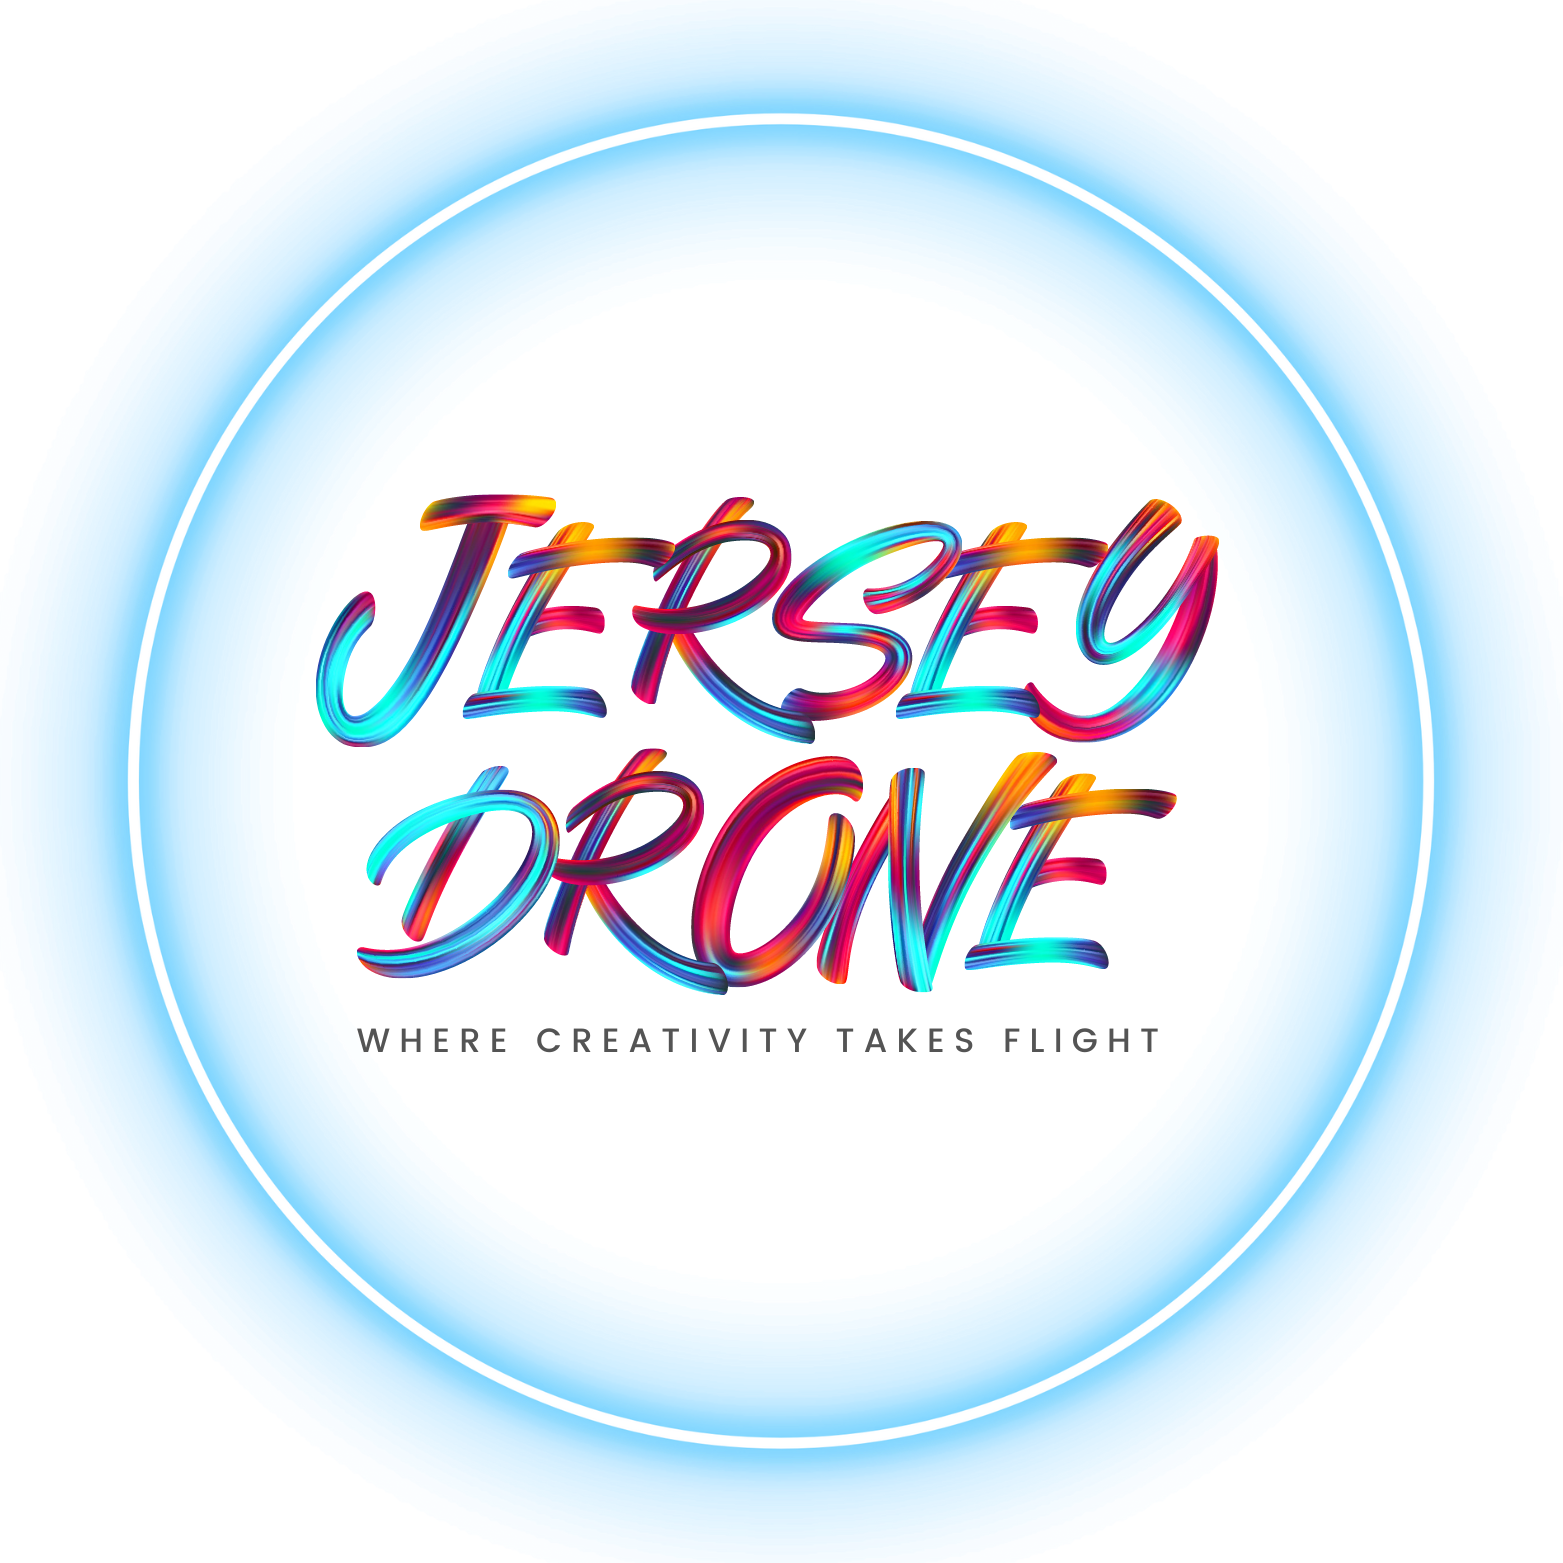 Jersey Drone